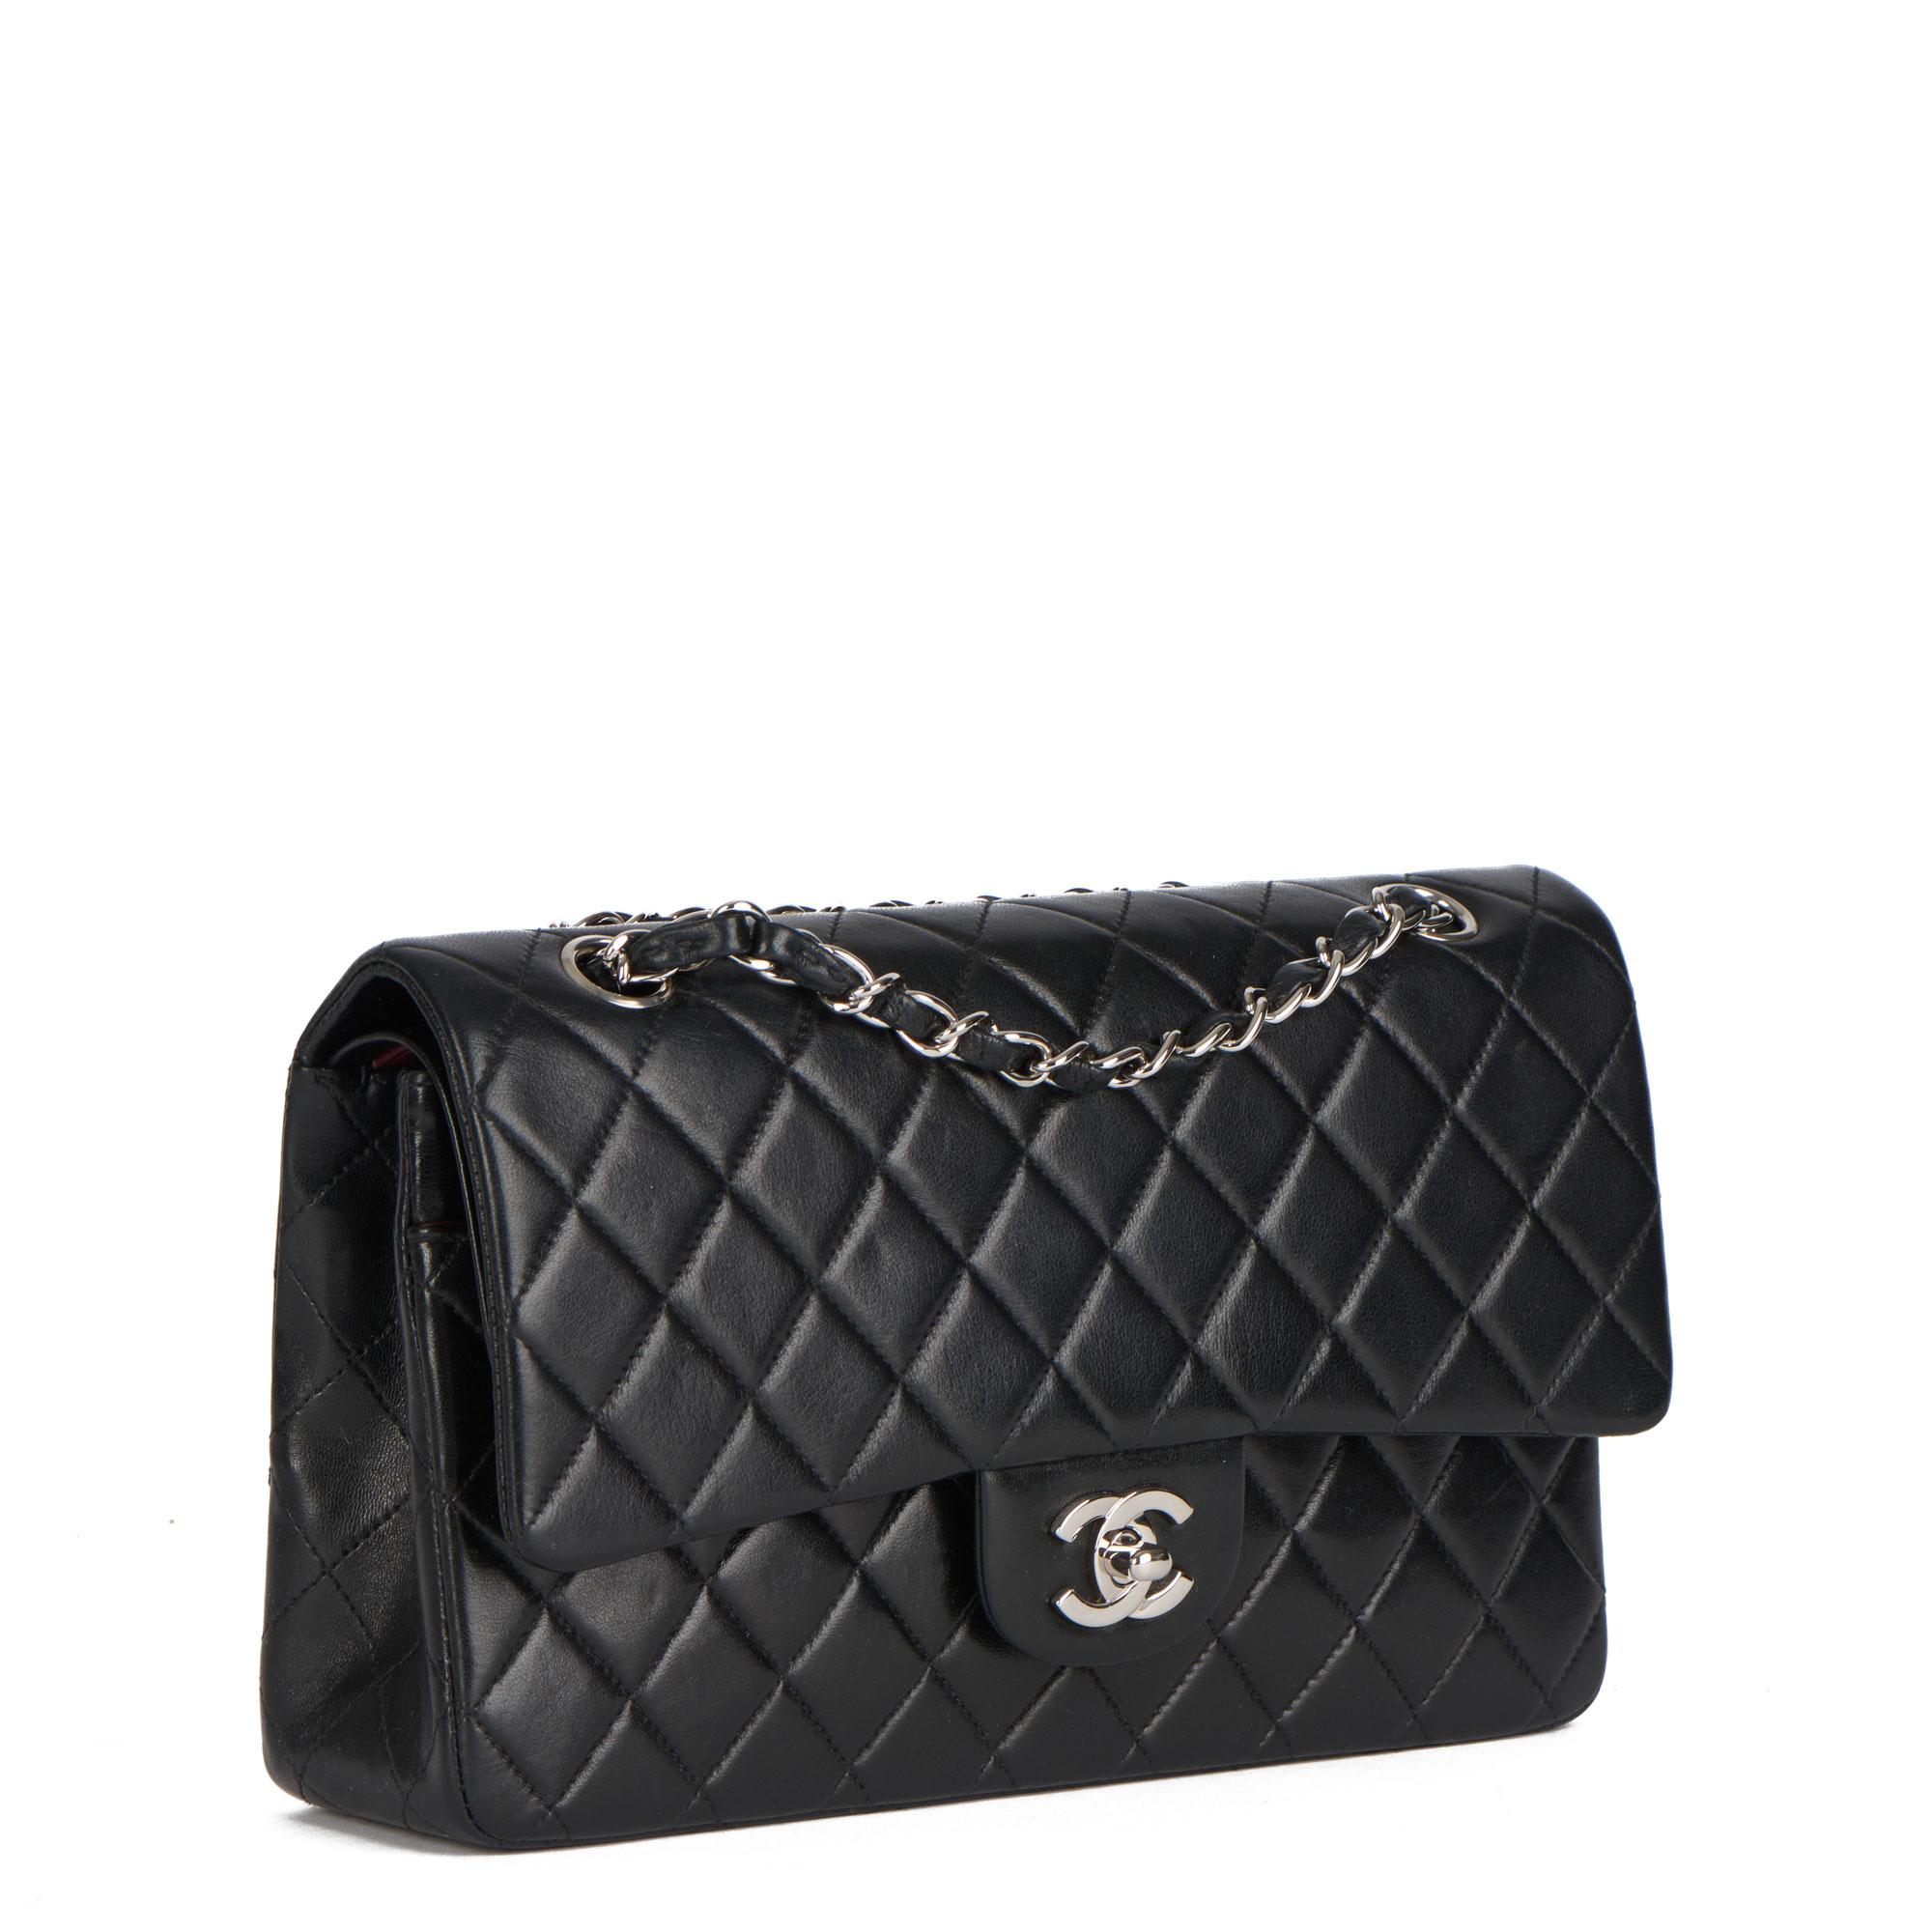 CHANEL Black Quilted Lambskin Vintage Medium Classic Double Flap Bag 7